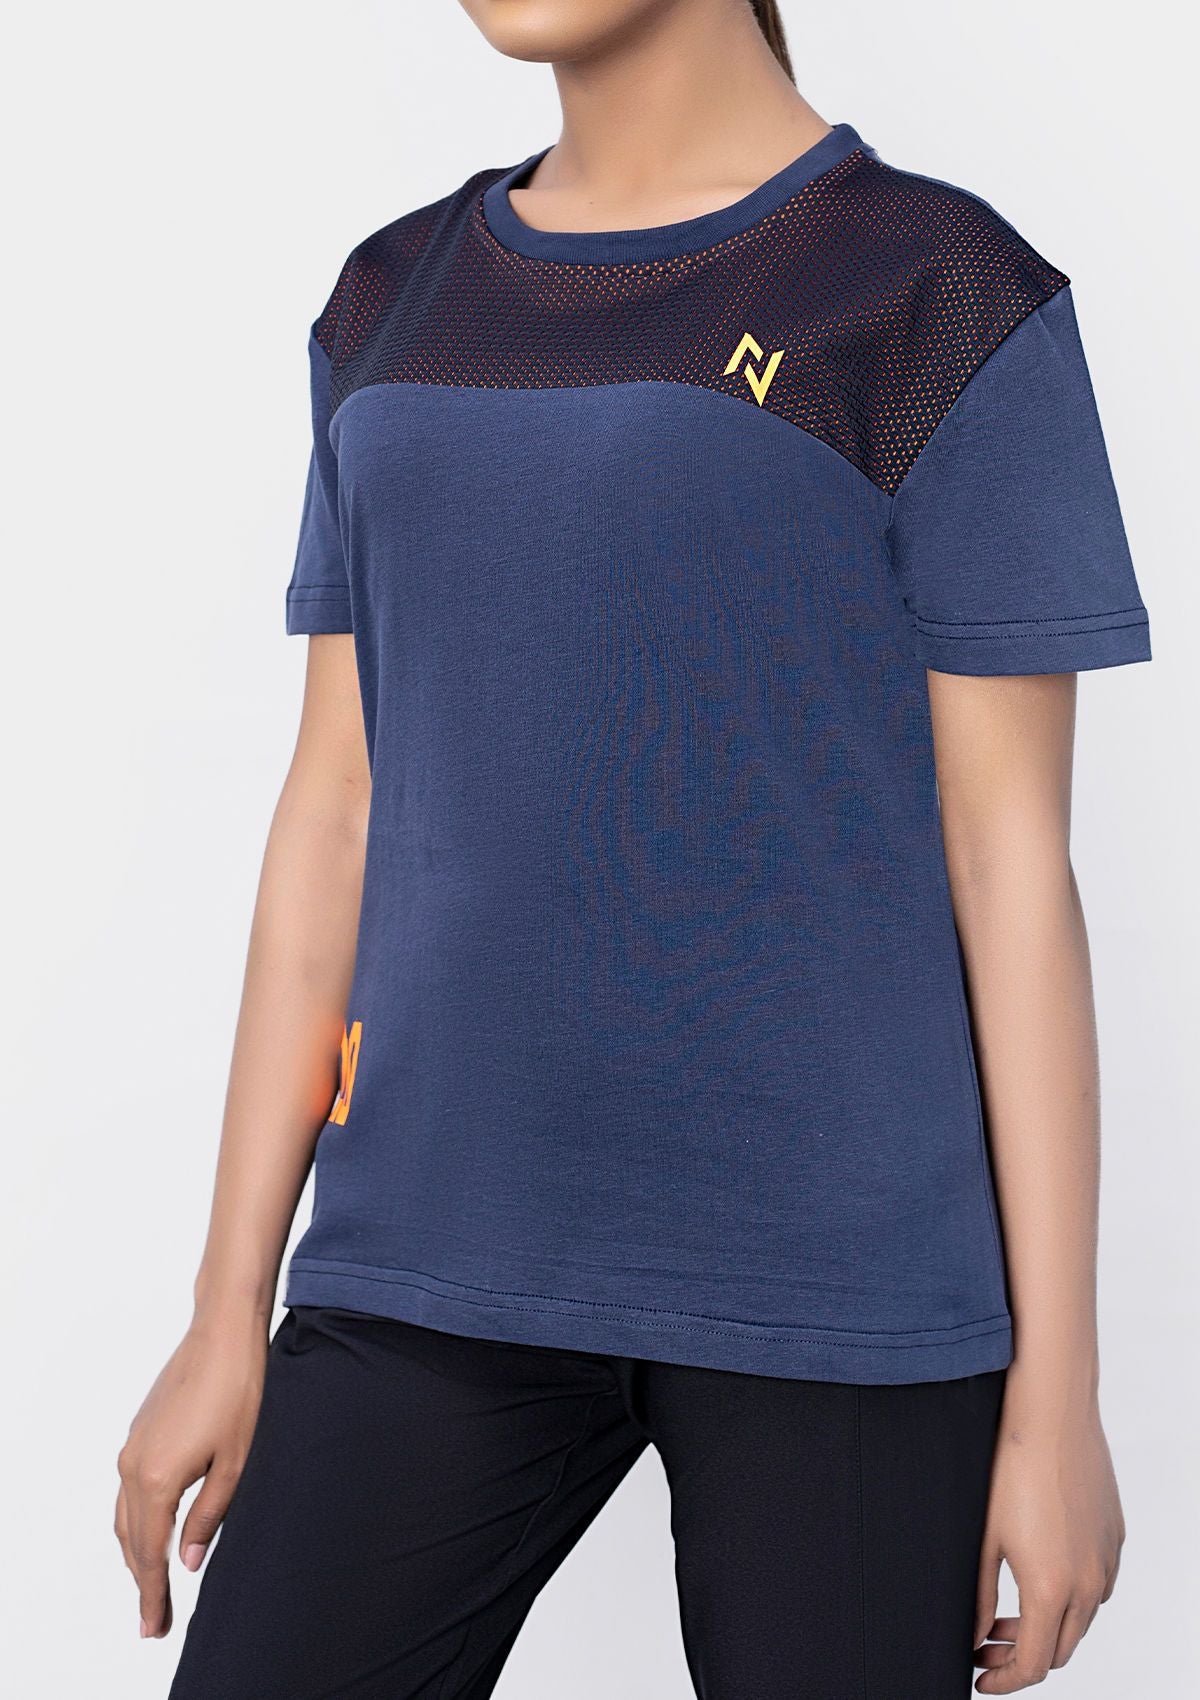 SUEDED COTTON MESH T-SHIRT - Nomad Apparel